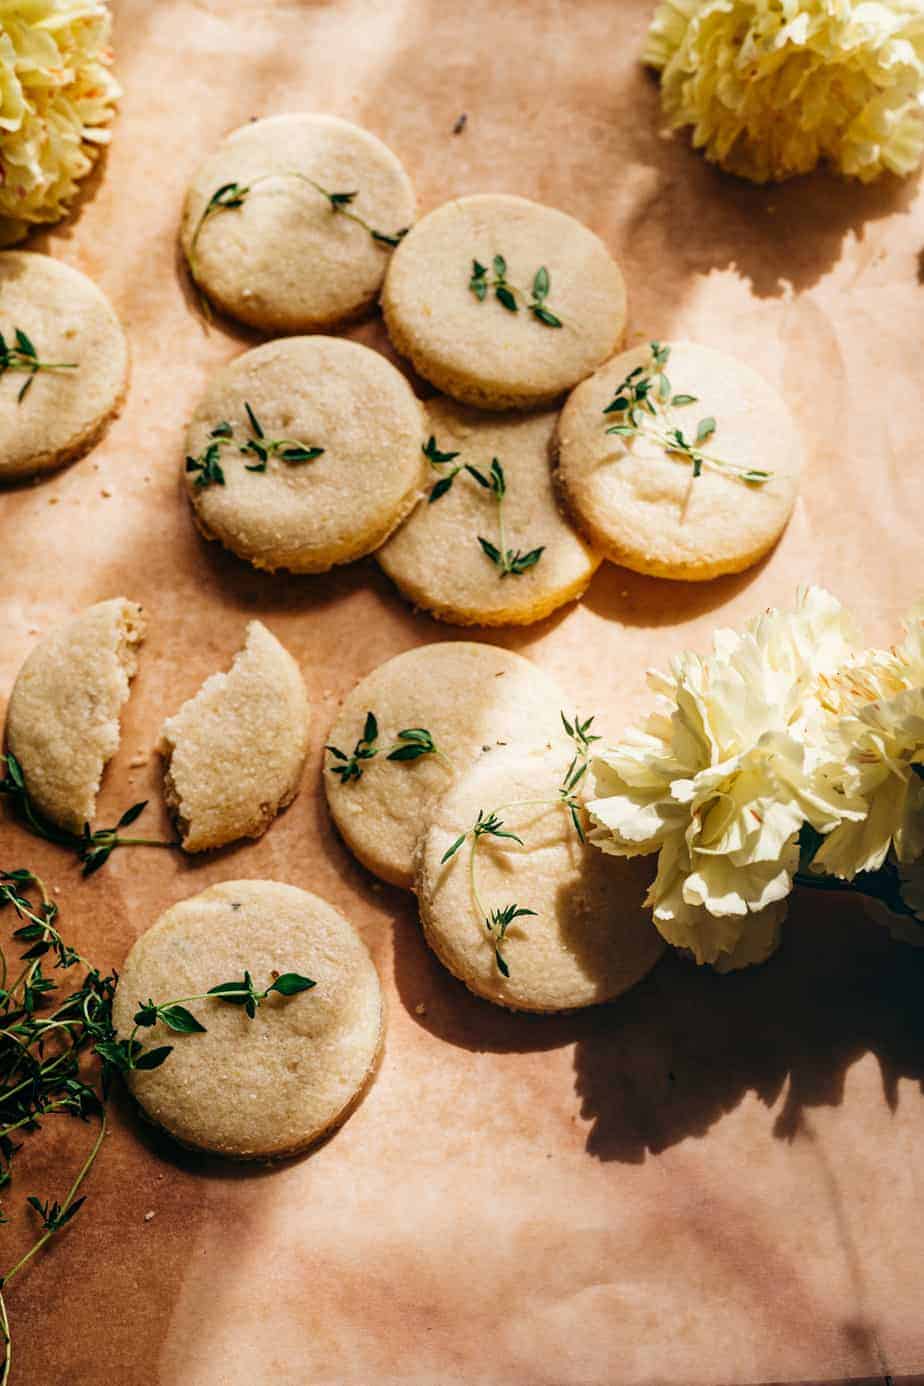 angle view of 10 round cookies, one broken in half all garnished with bright green thyme- with bright sunshine casting dark shadows and yellow flowers styled around the cookies